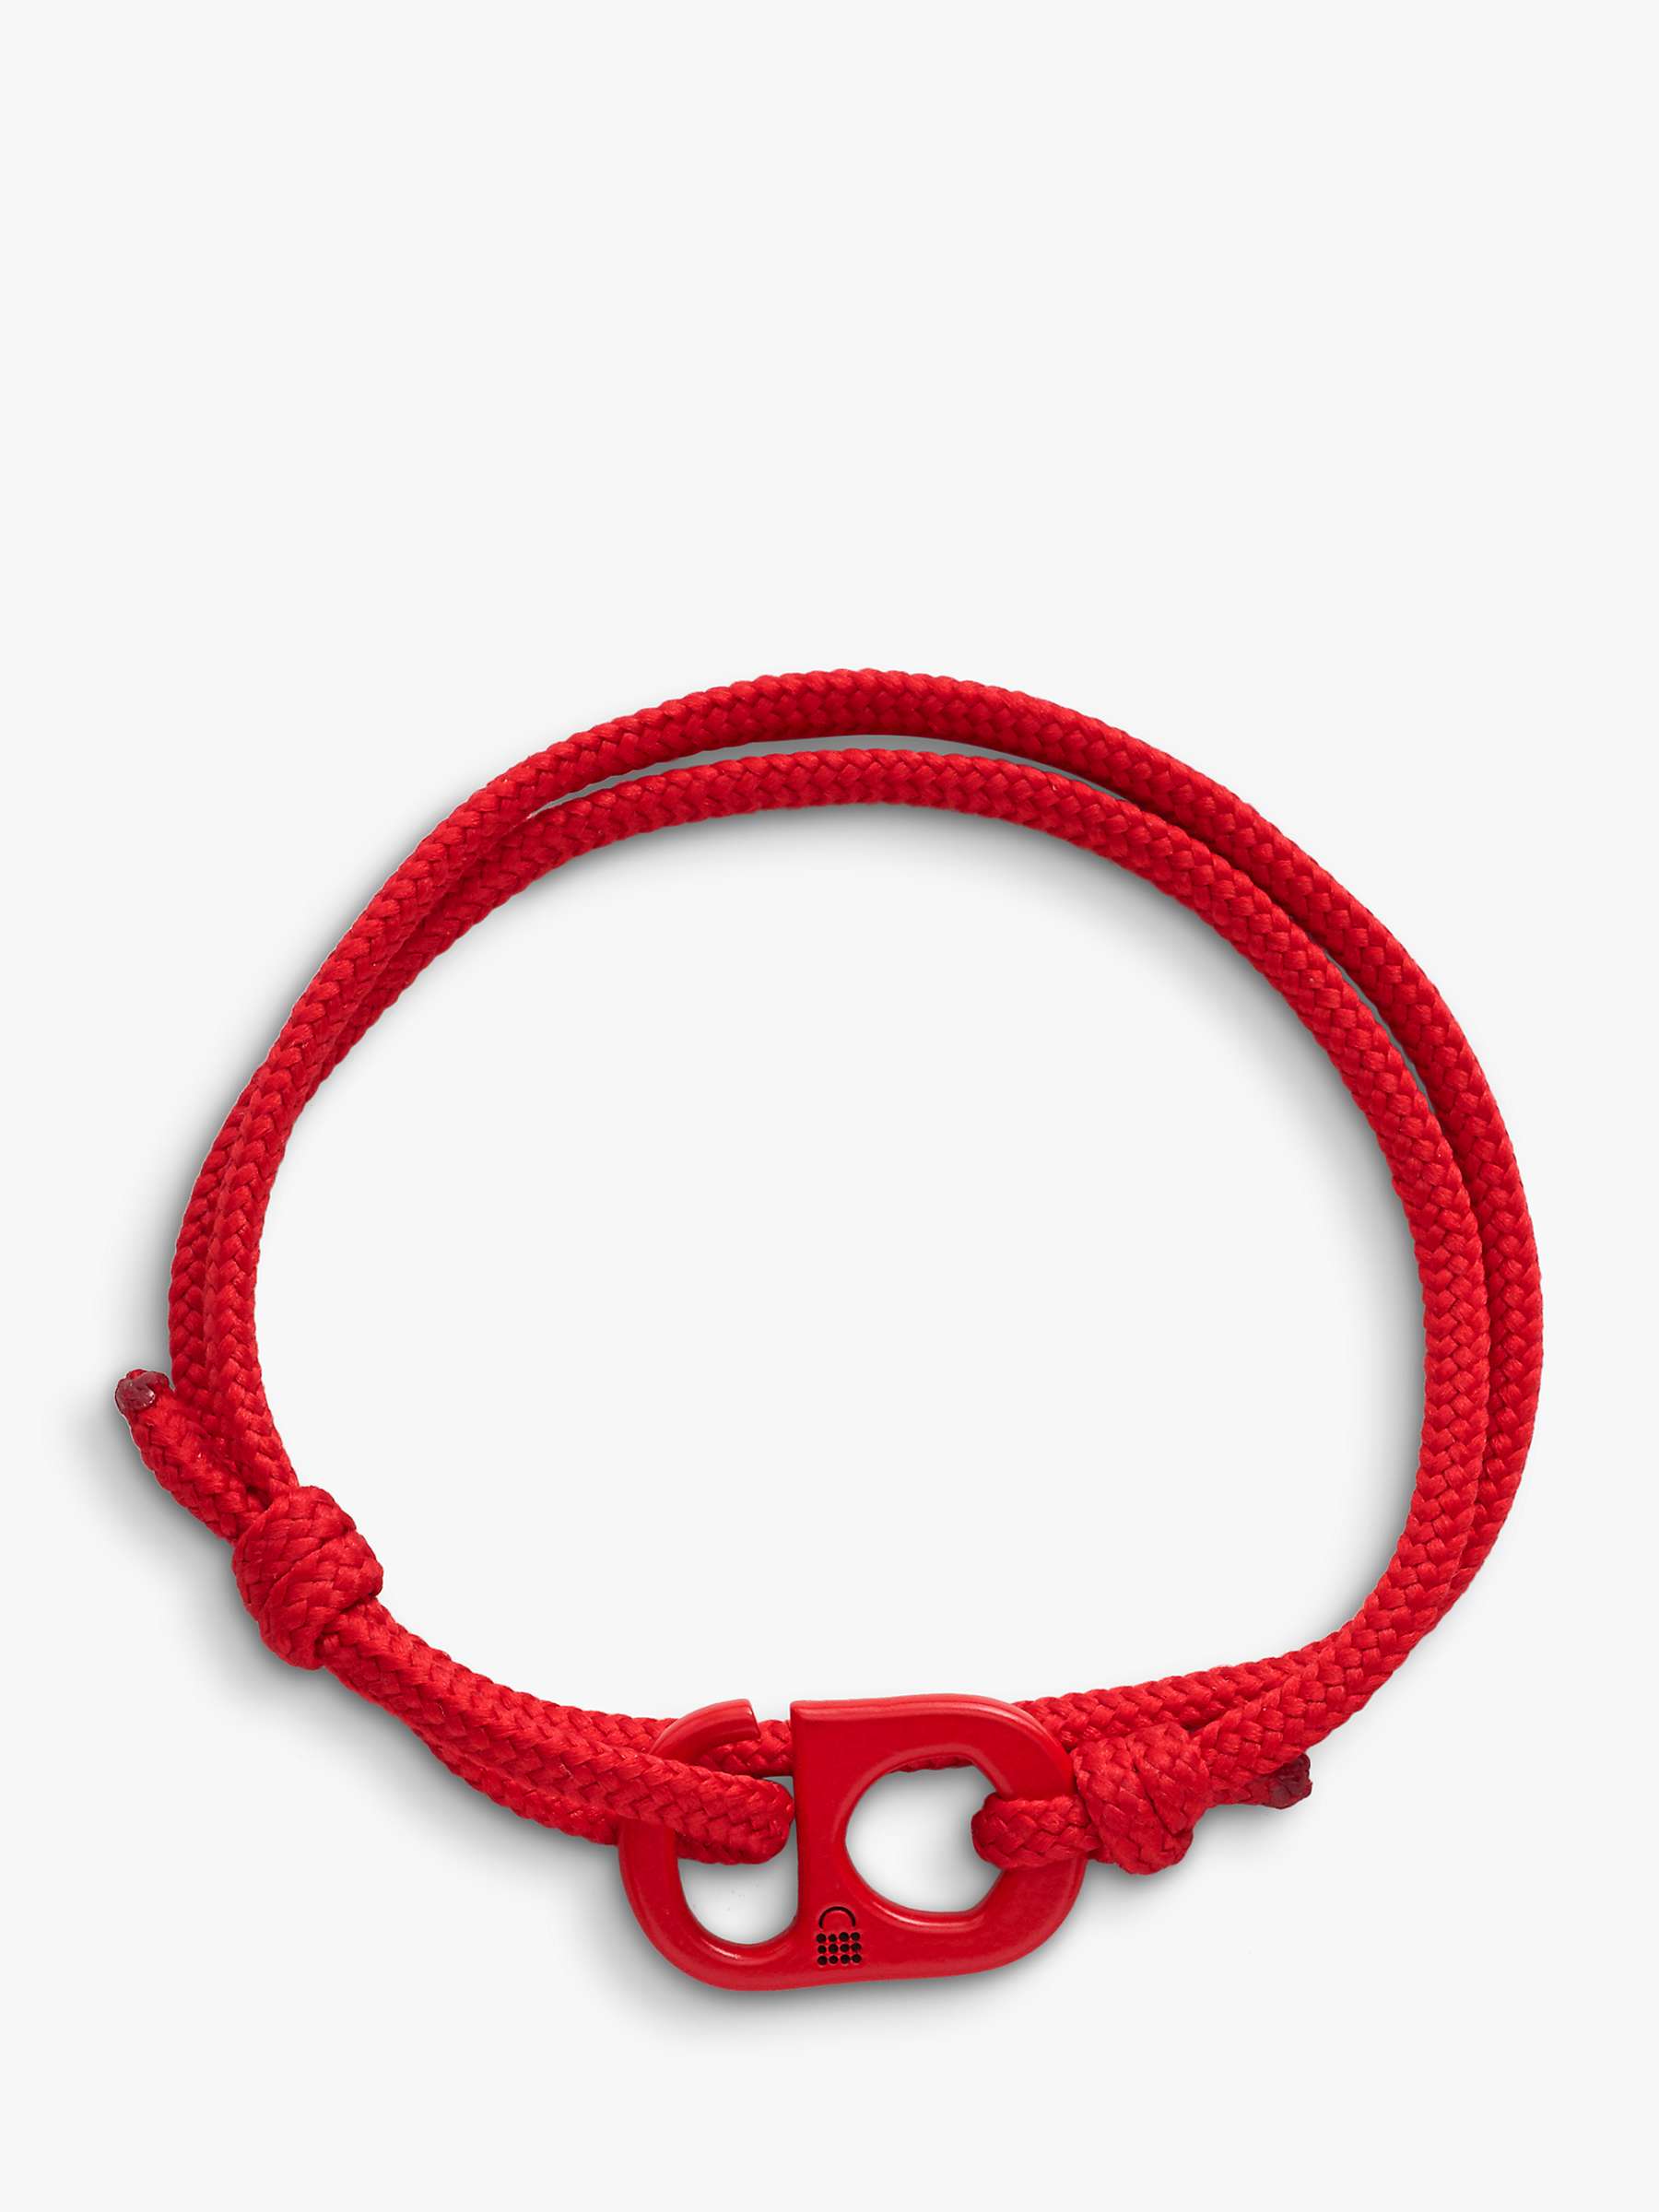 Buy #TOGETHERBAND UN Goal 1 - No Poverty Recycled Plastic Classic Bracelet, Pack of 2, Red Online at johnlewis.com